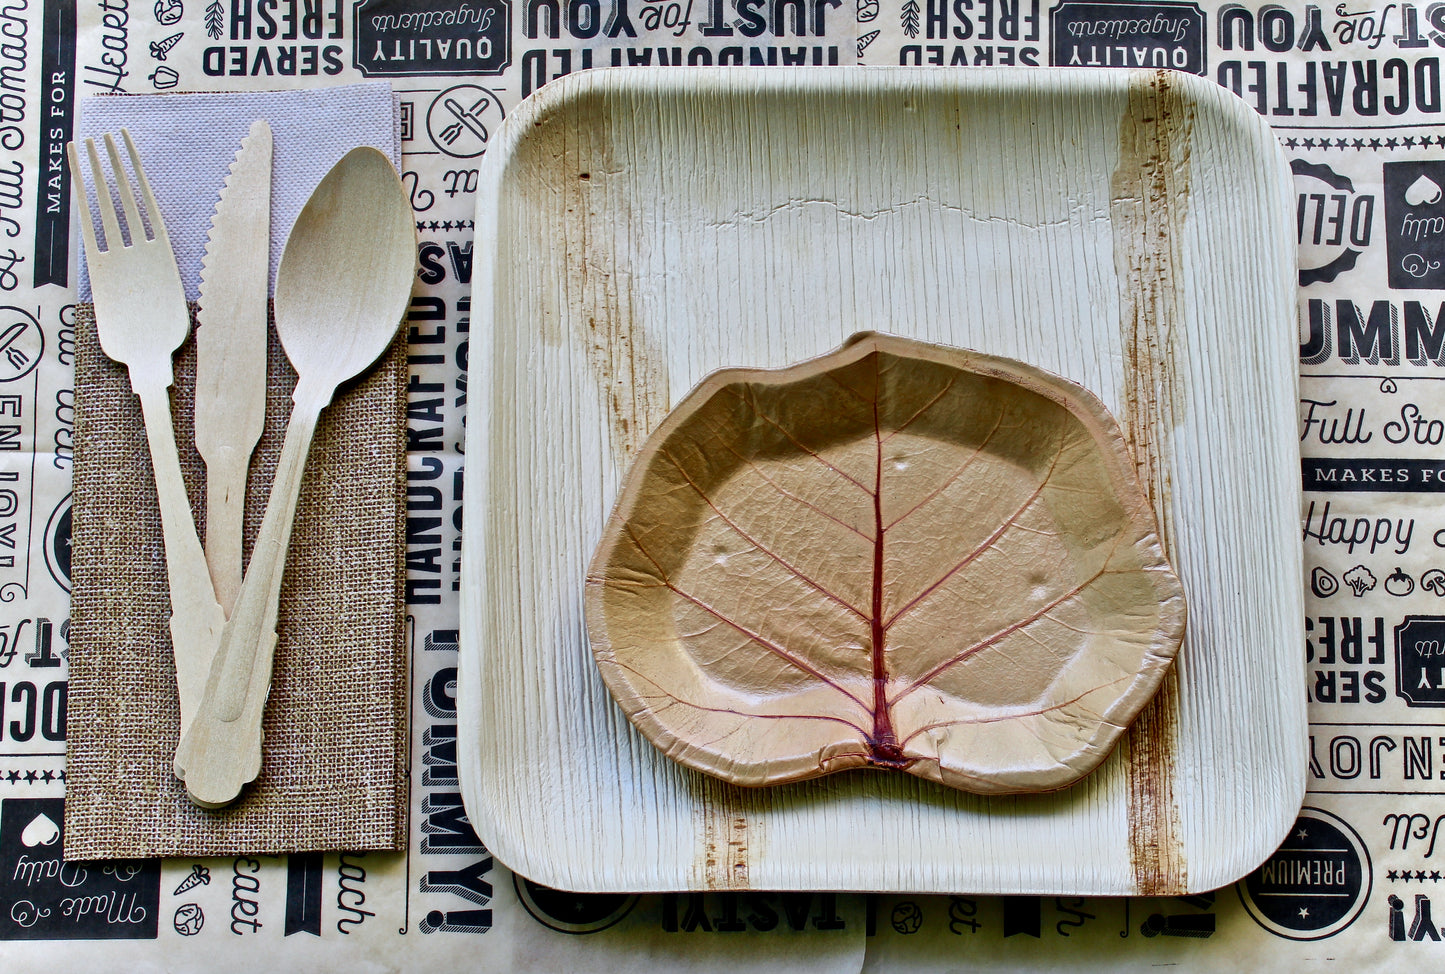 Palm Leaf Plate 50 Pic 8" Square and 150   Spoon - Knife - Fork    Disposable - Biodegradable - good for Dessert